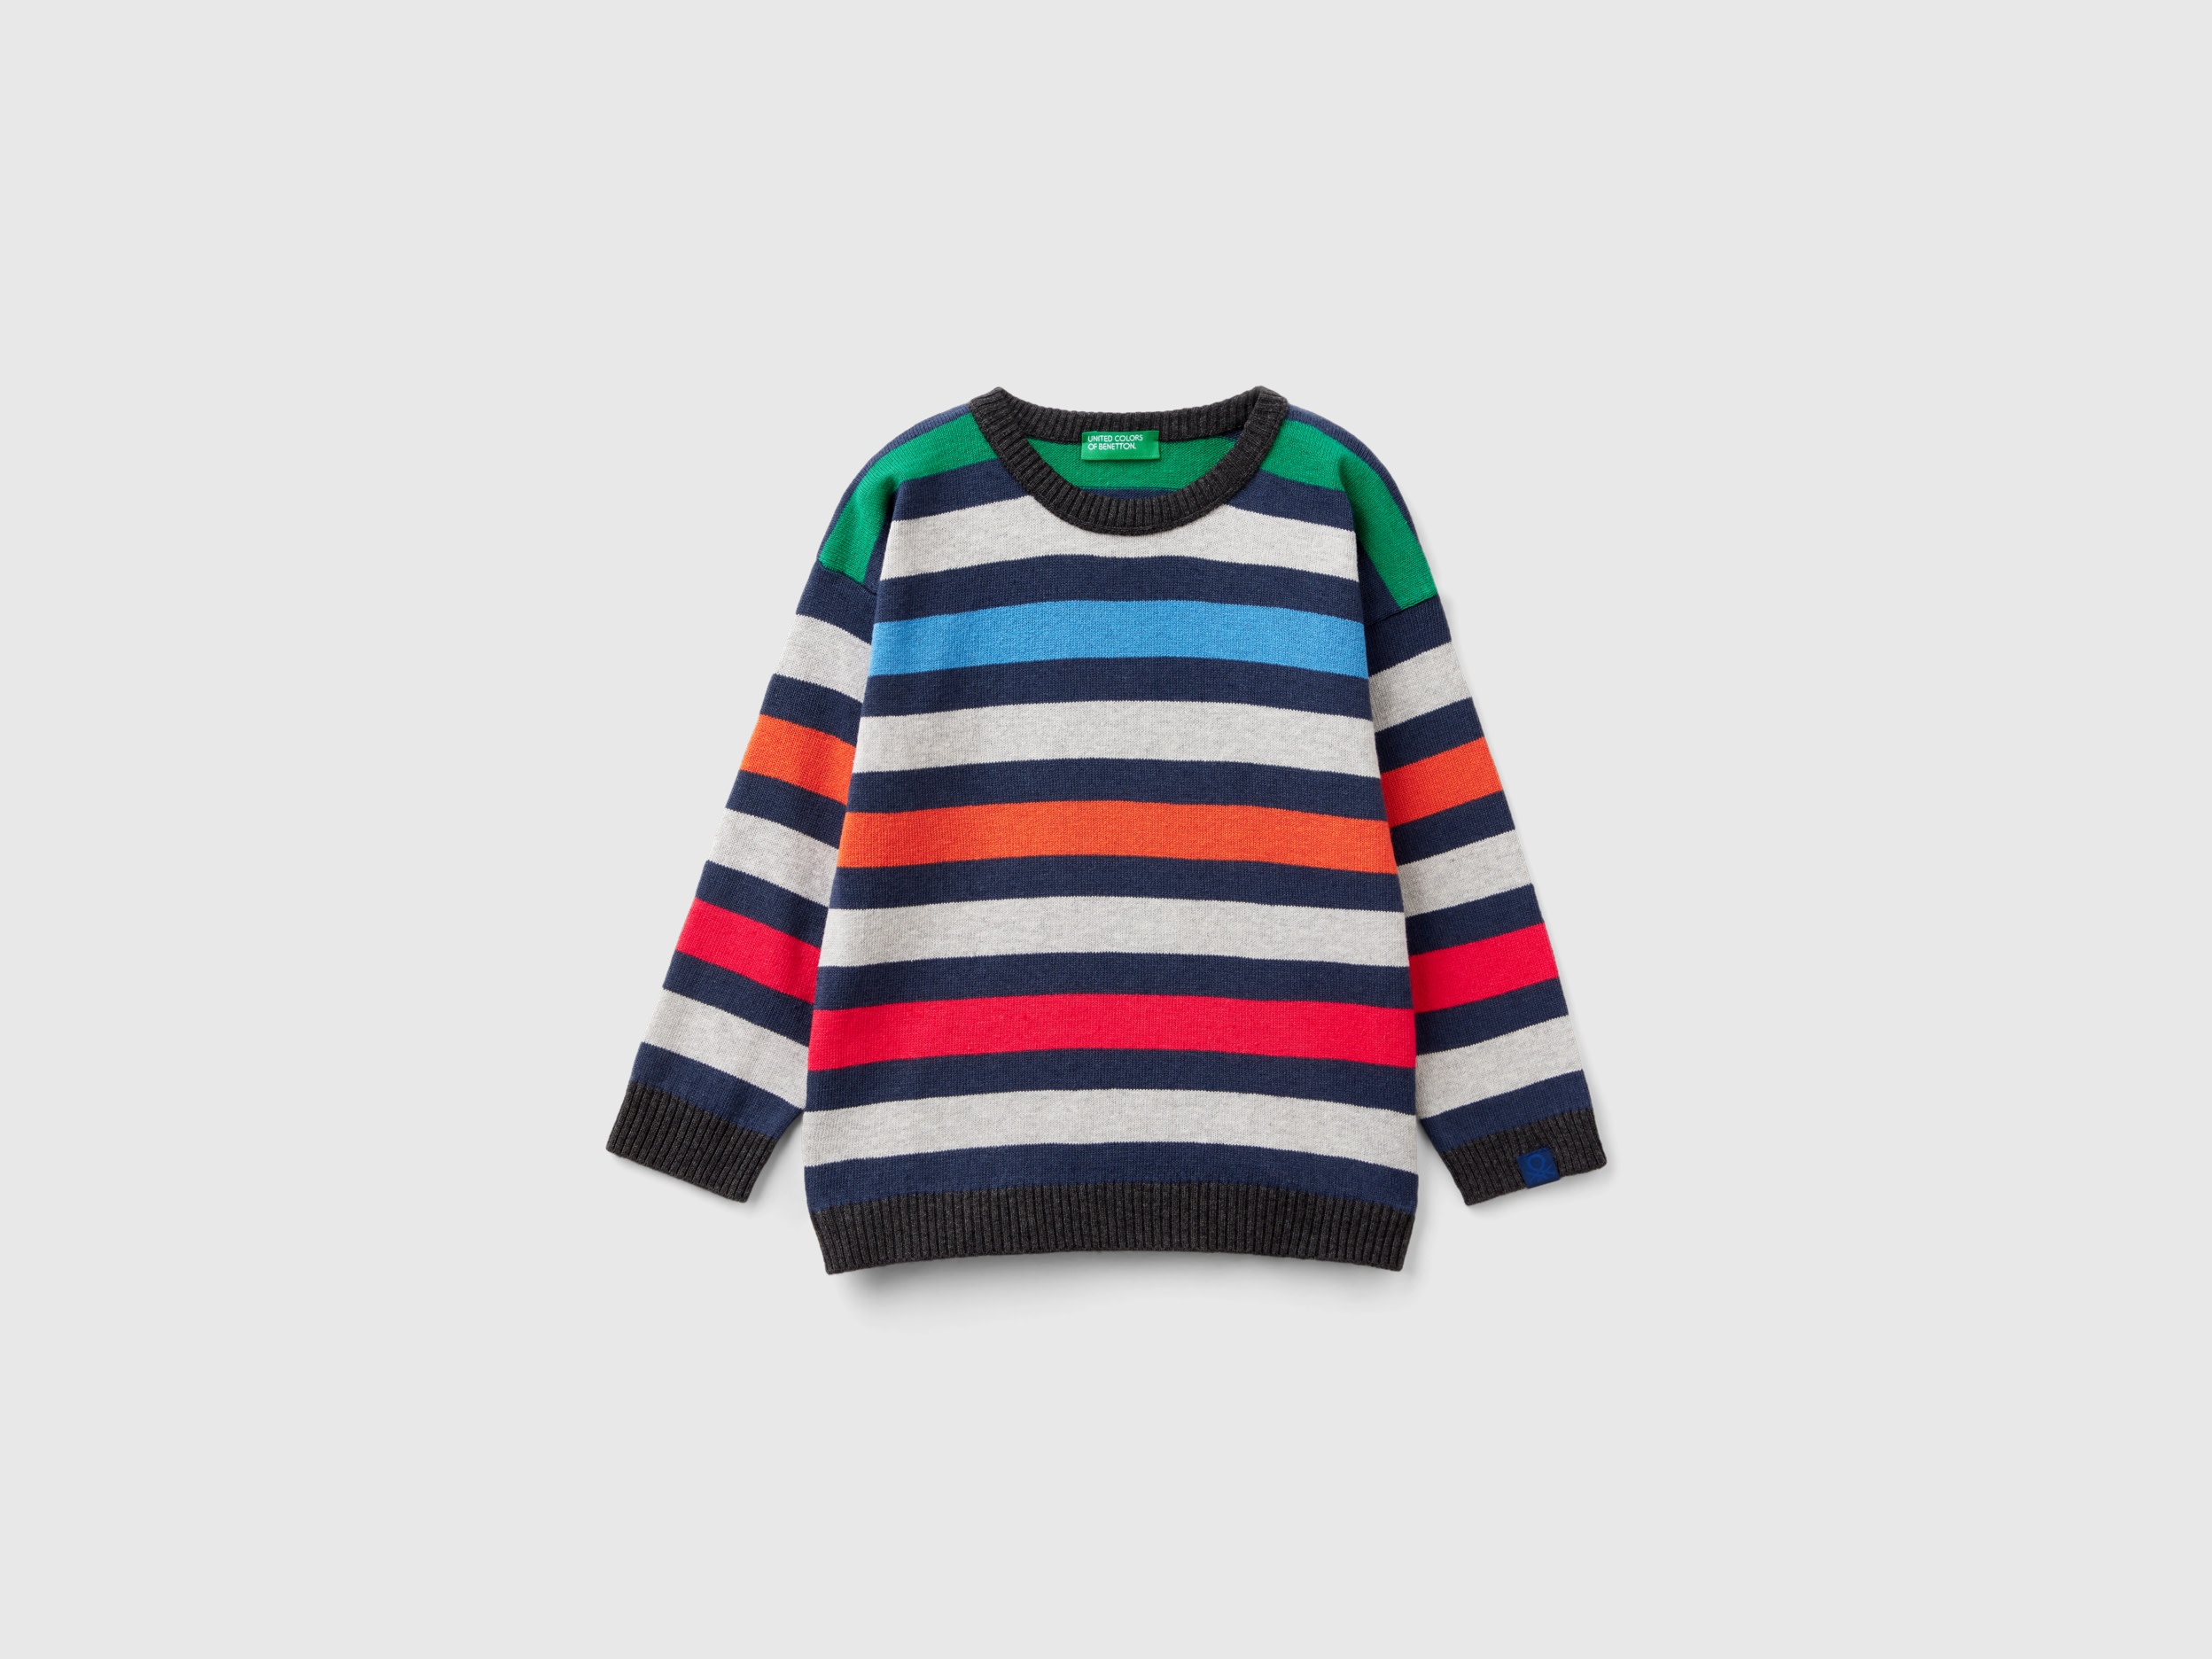 Image of Benetton, Striped Sweater, size 98, Multi-color, Kids